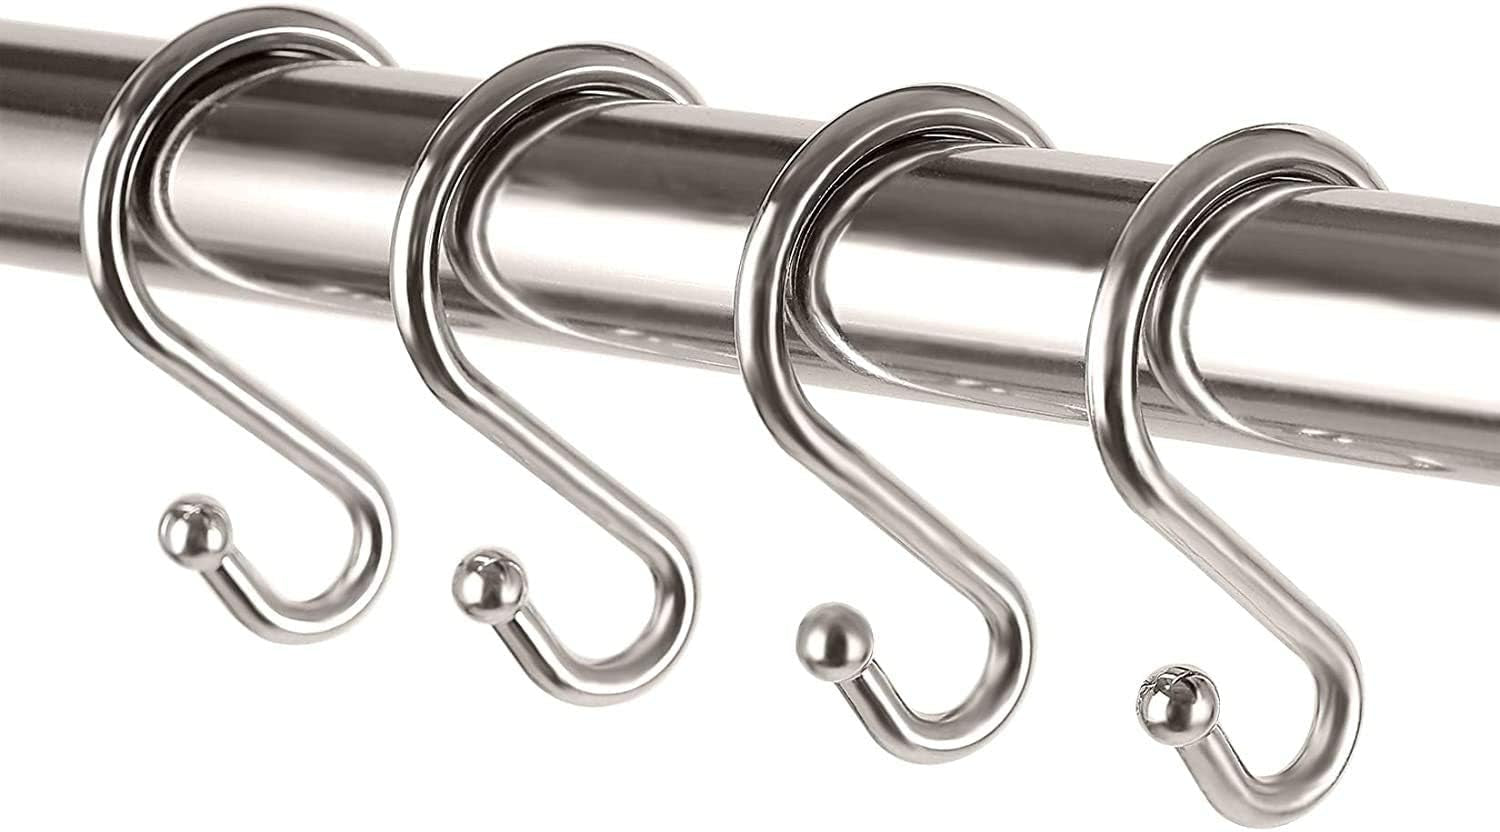 Metal Shower Curtain Hooks，Set of 12 Rings，Rust Resistant S Shaped Hooks Hangers for Shower Curtains, Kitchen Utensils, Clothing, Towels, Etc. (Nickel)